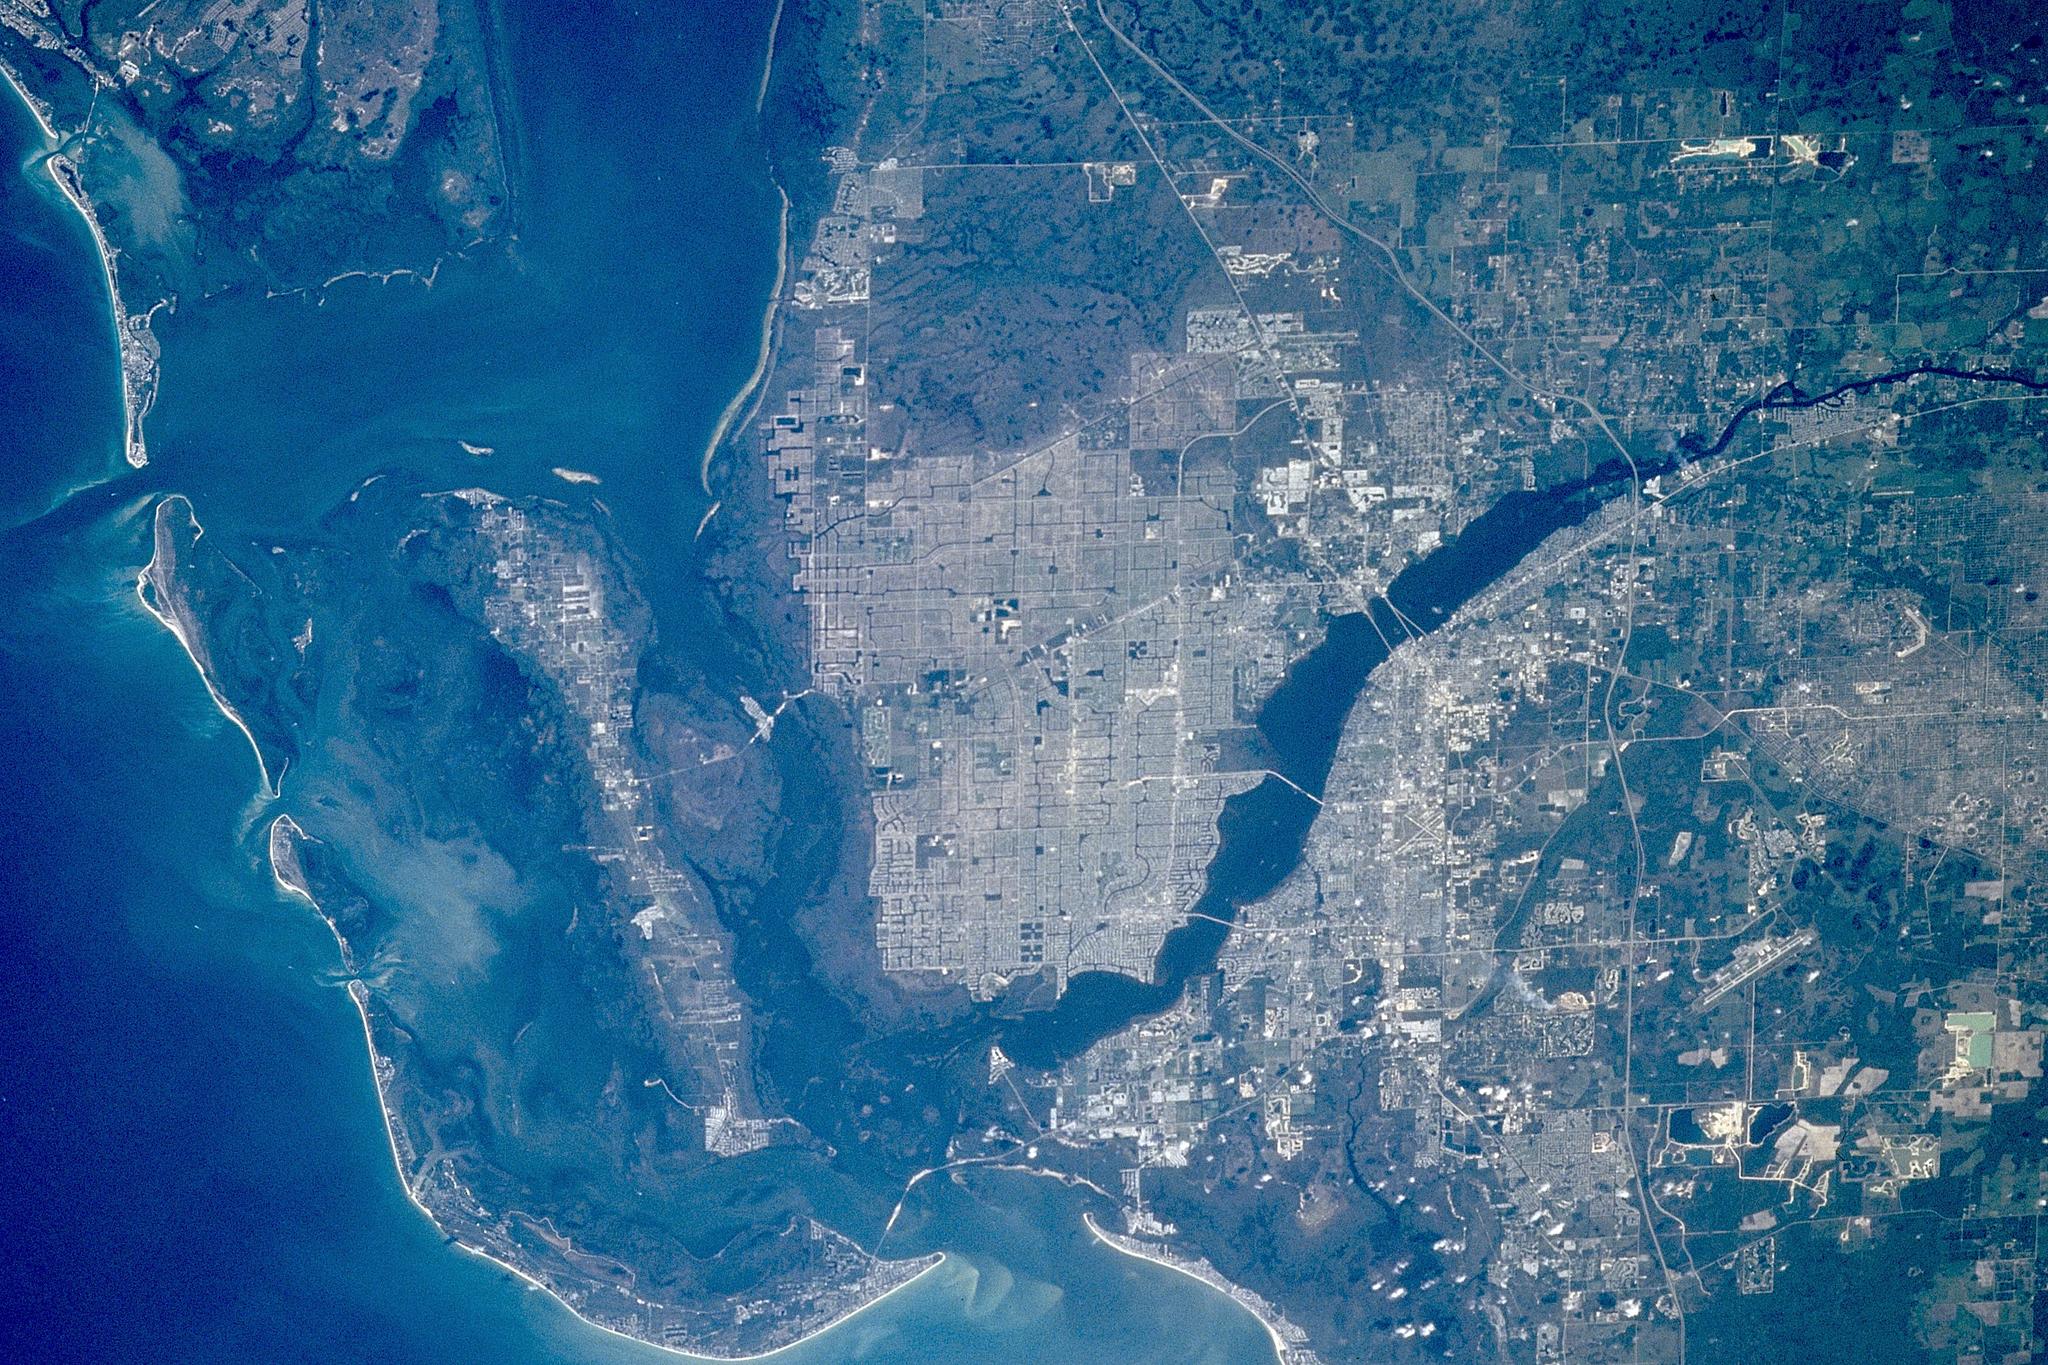 This aerial picture of Cape Coral, Florida shows its unique layout and special geographic features that is intertwined with its fascinating history.